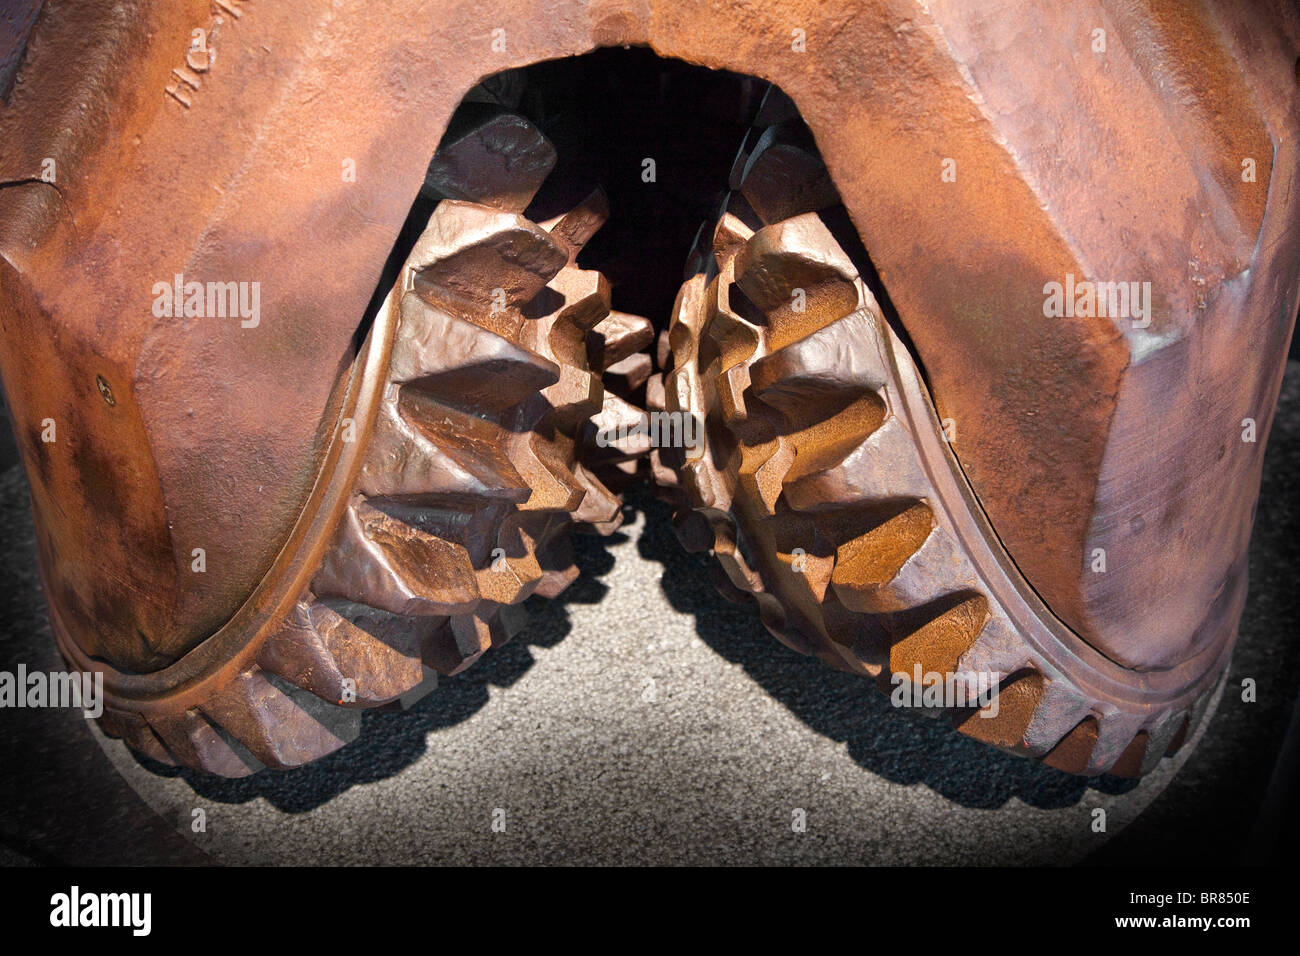 Oil drill bit detail of serated wheels which turn during drilling Stock Photo